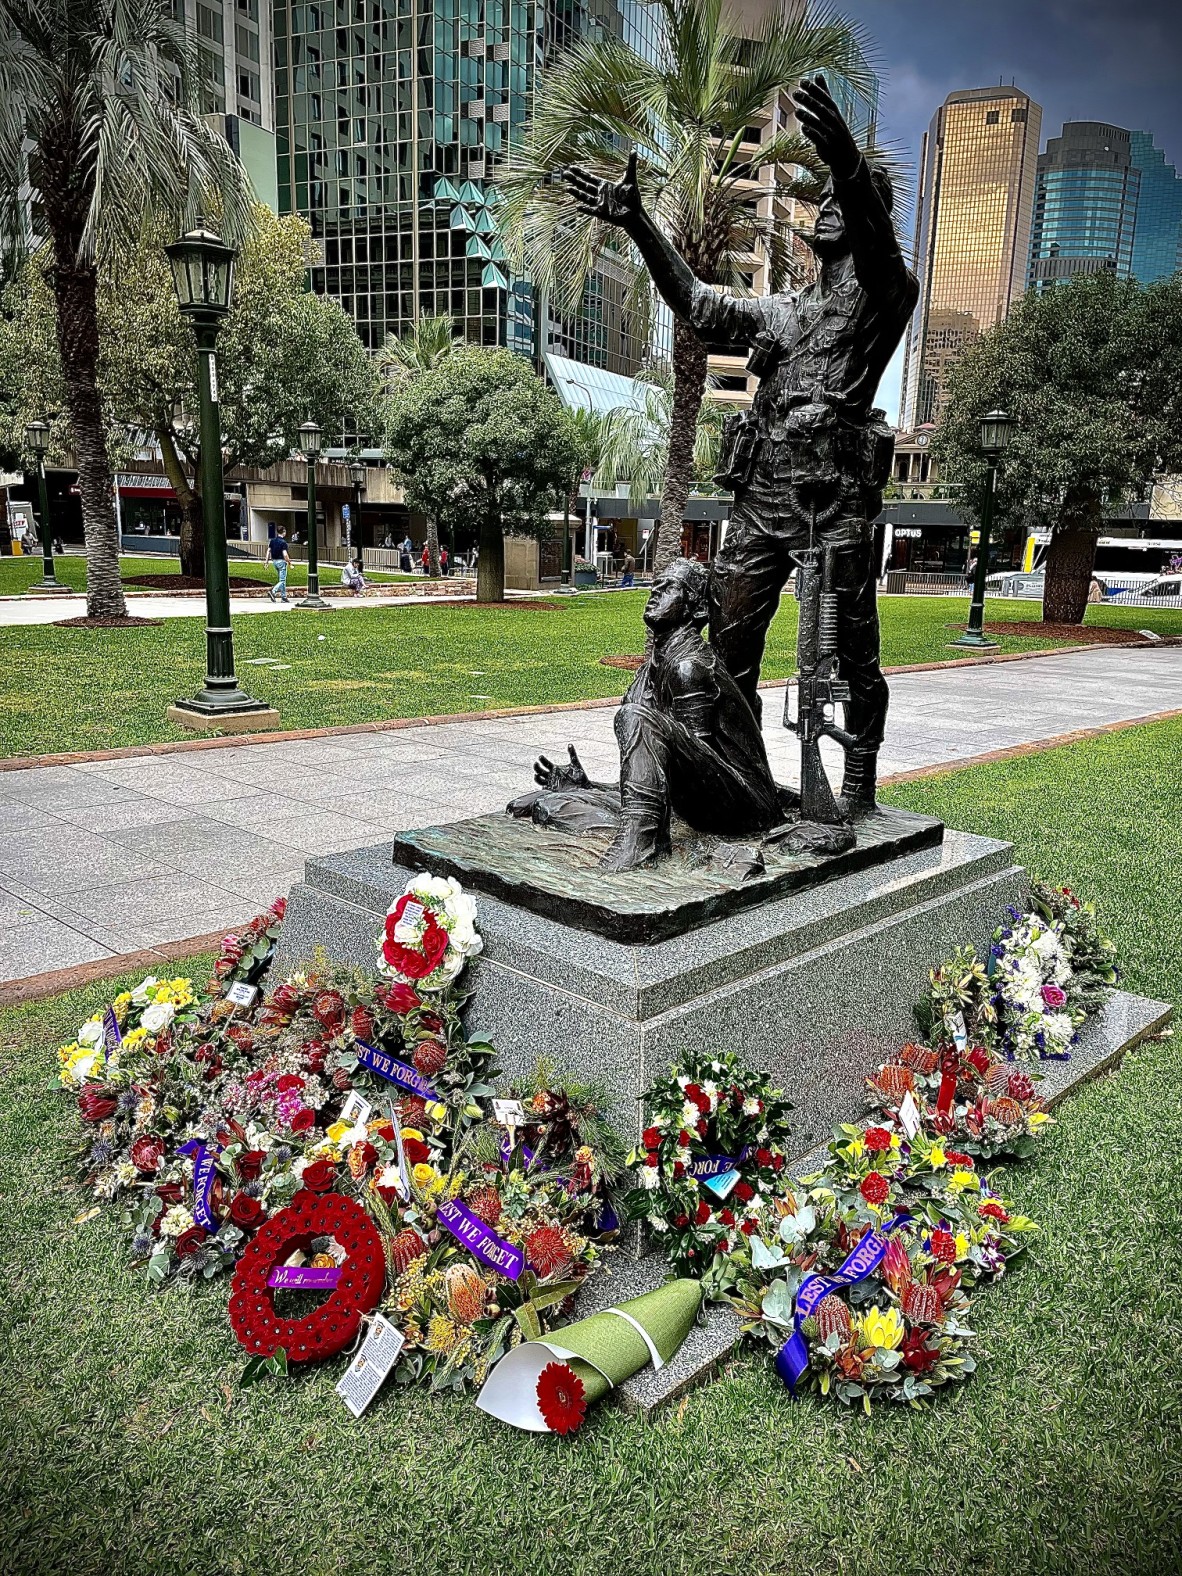 The Vietnam Memorial with flowers and wreaths from Vietnam Veterans’ Day 2023.